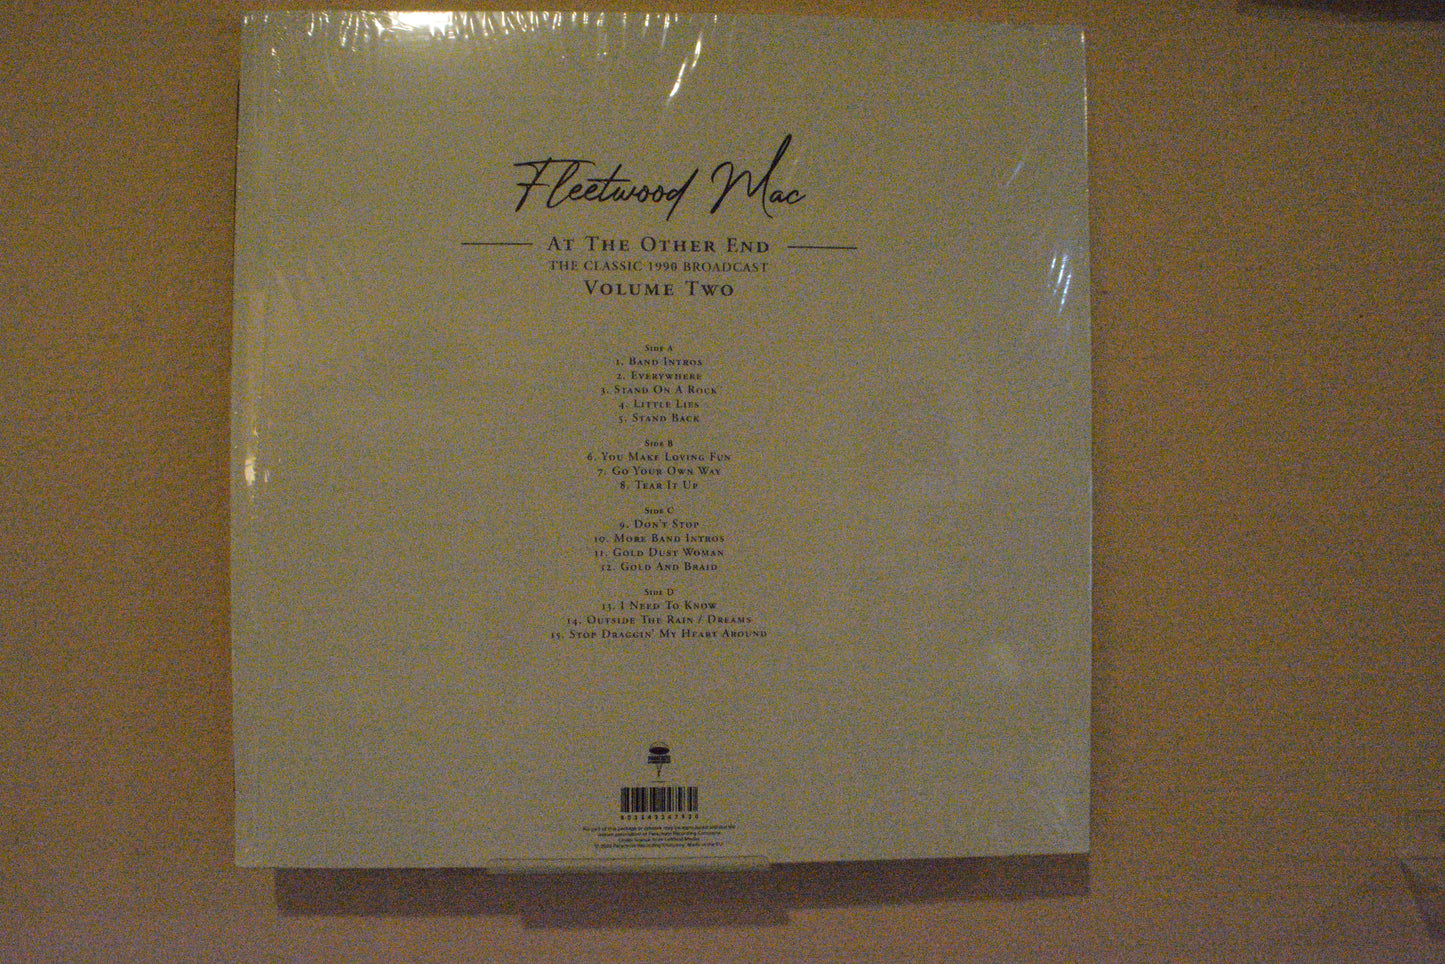 Fleetwood Mac - At The Other End (Live 1990 Broadcast) LP